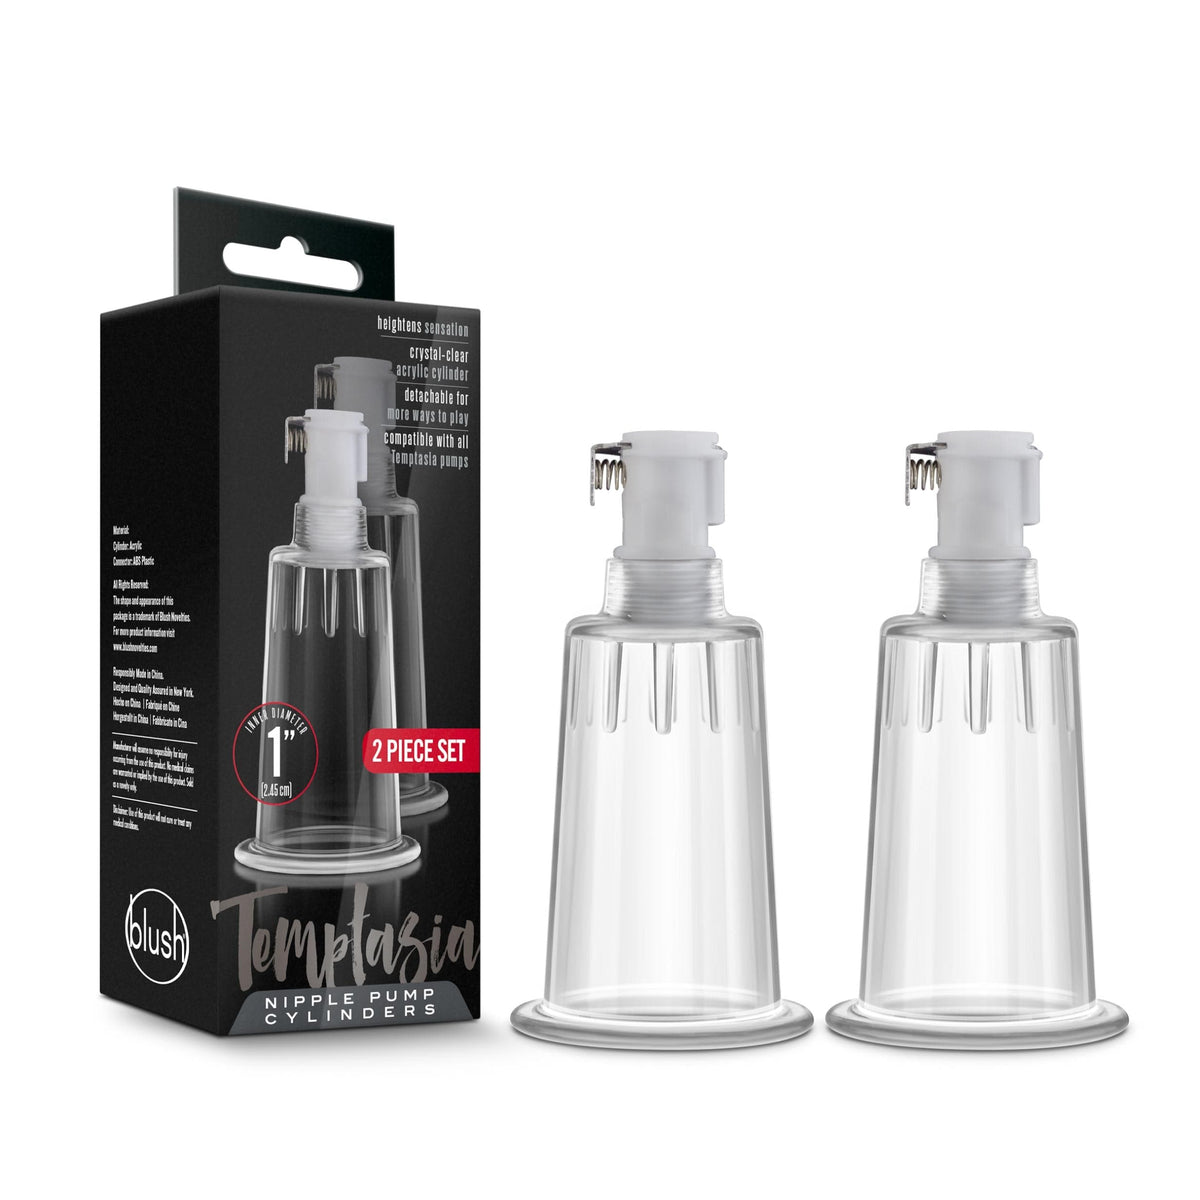 temptasia nipple pumping cylinders set of 2 1 inch diameter clear